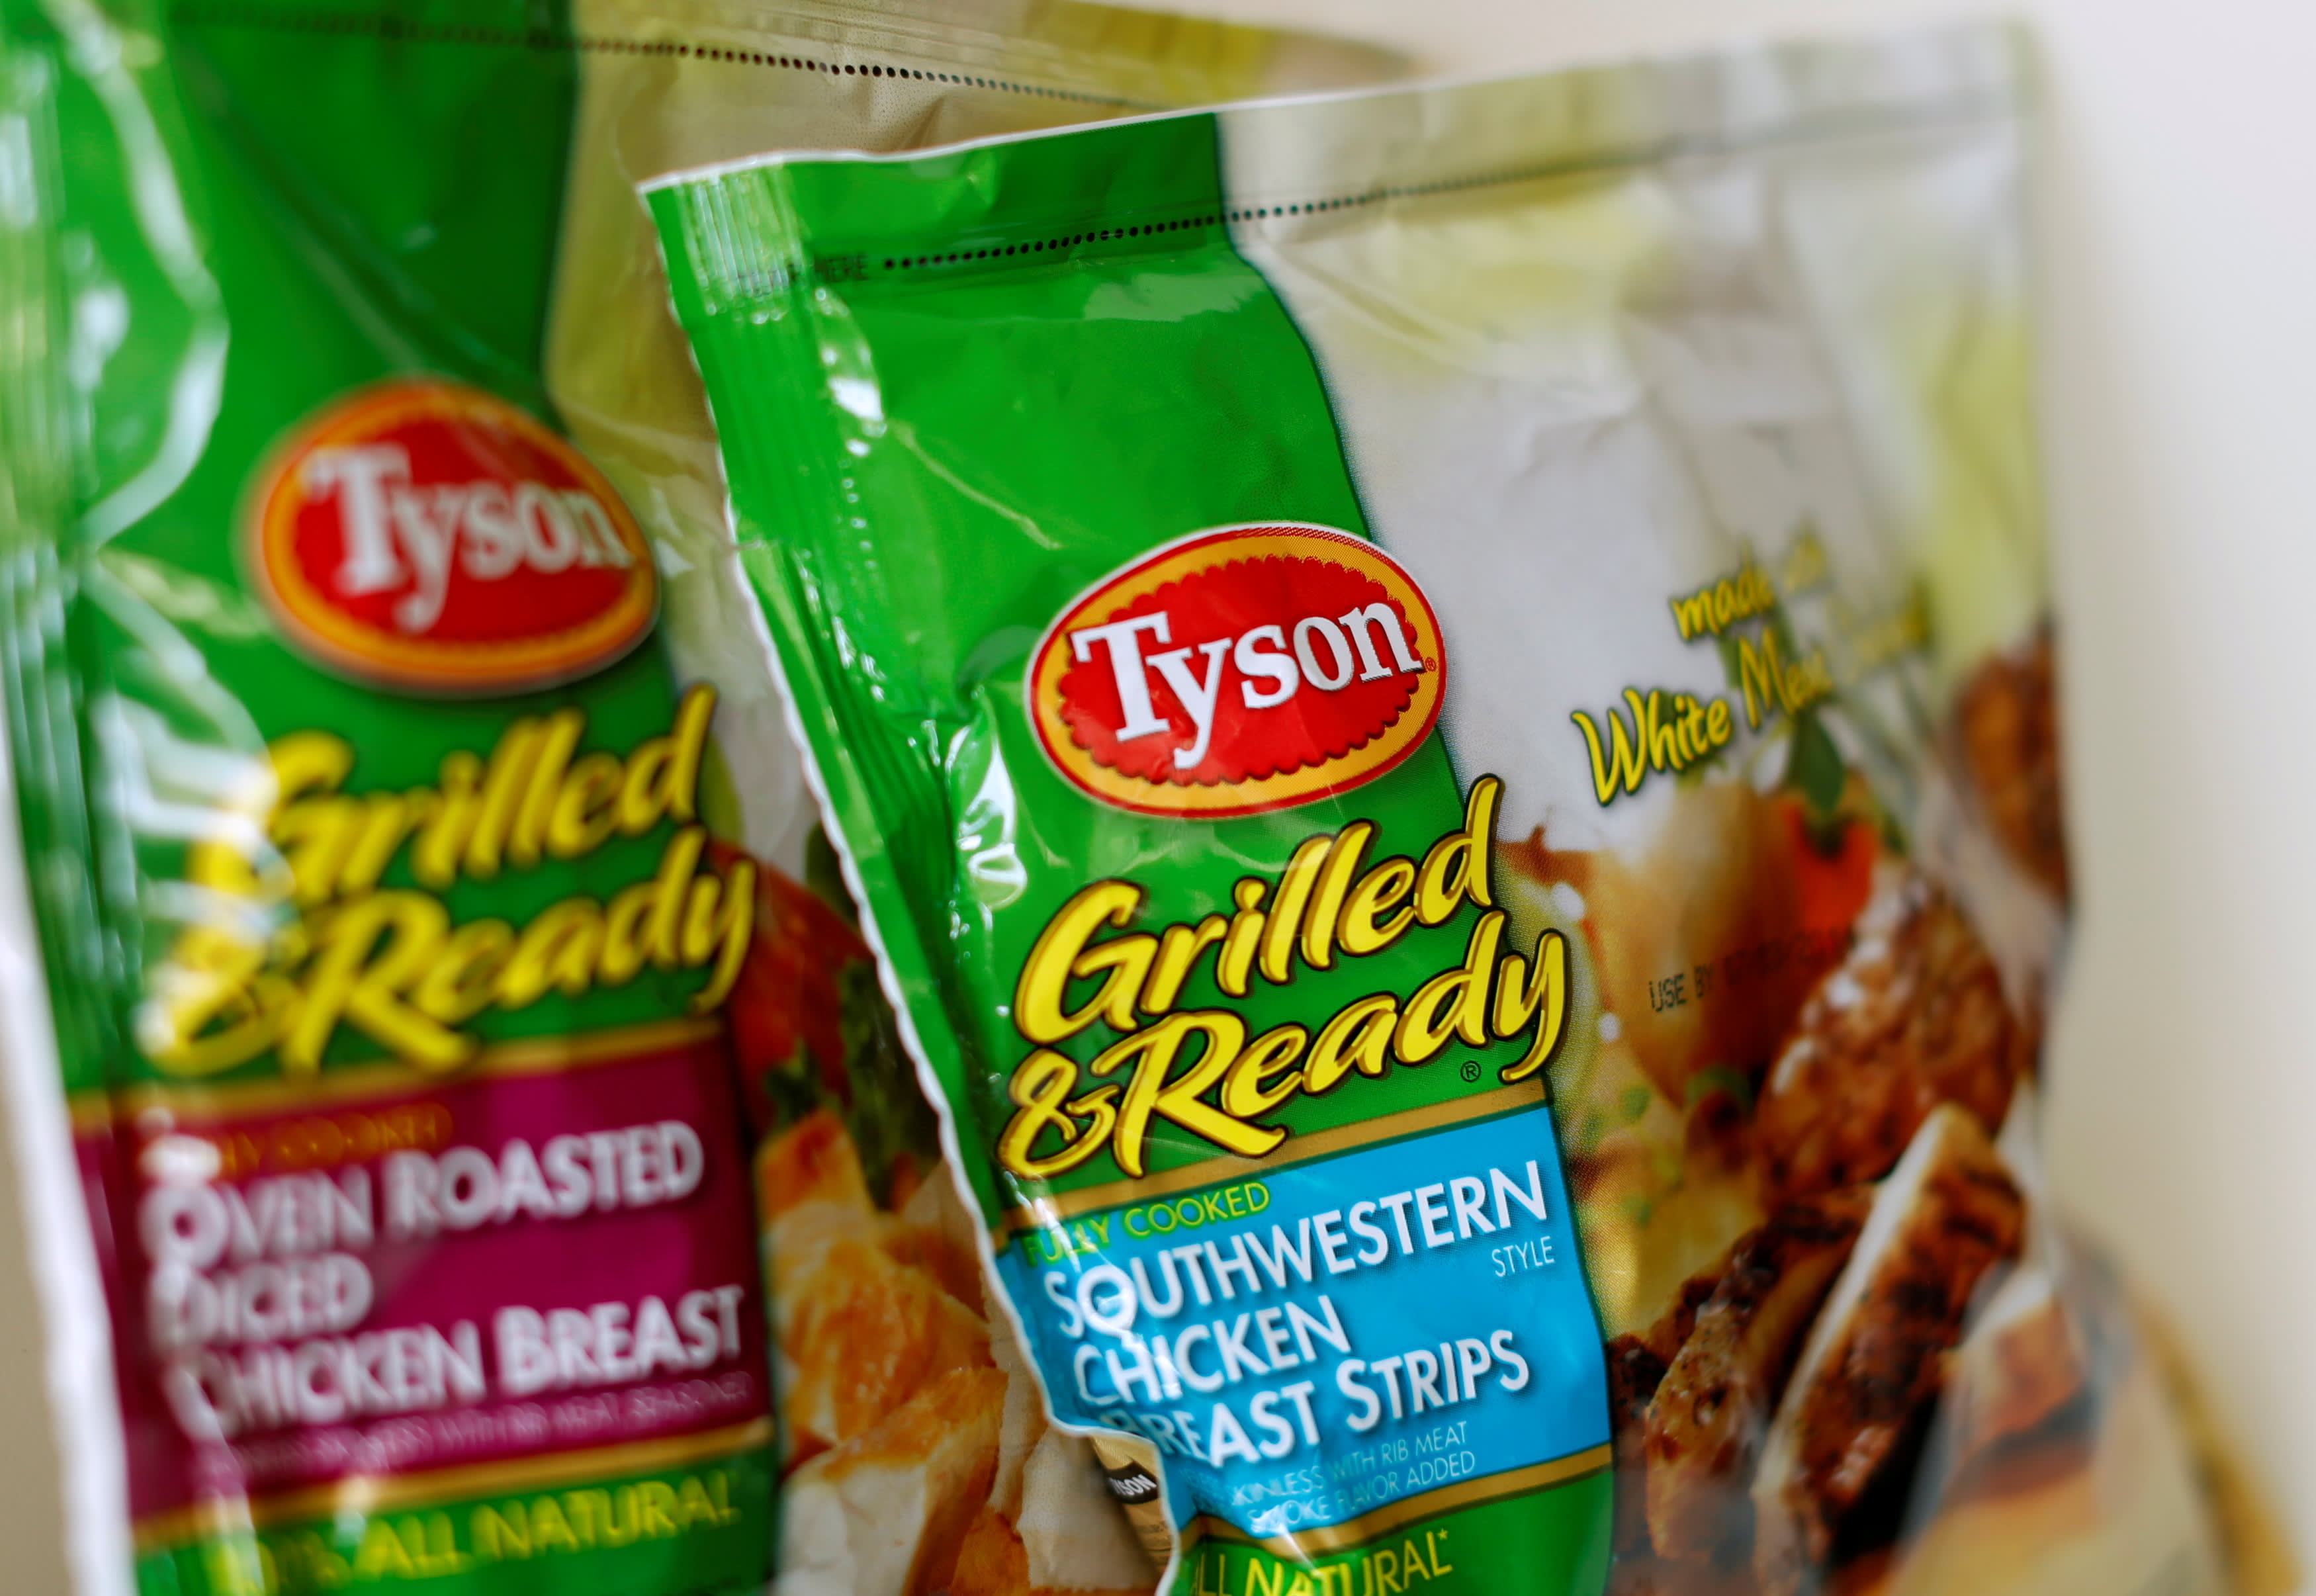 Bank of America downgrades Tyson Foods ahead of earnings, citing worsening conditions in meat industry